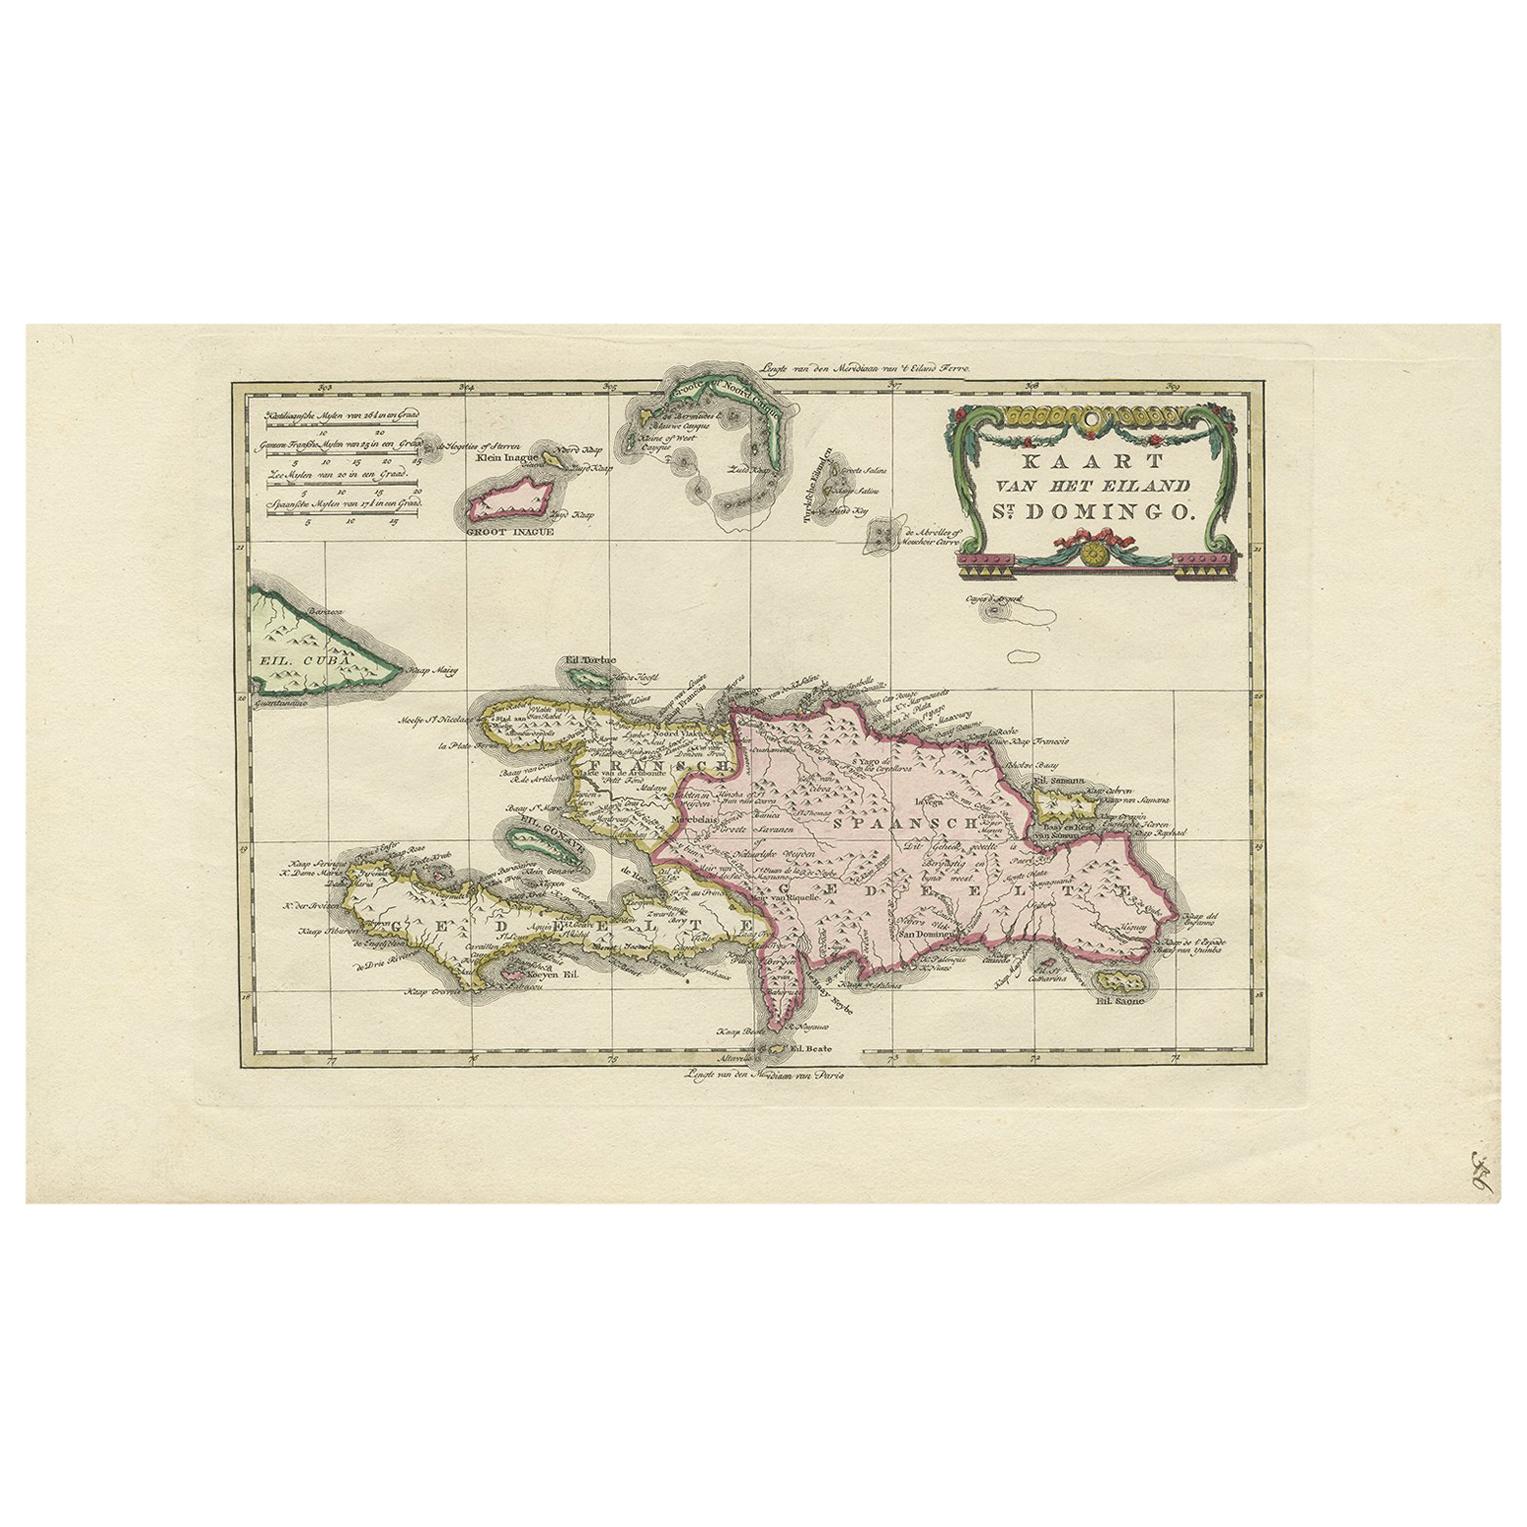 Antique Map of the Island of St. Domingo by Raynal, 1784